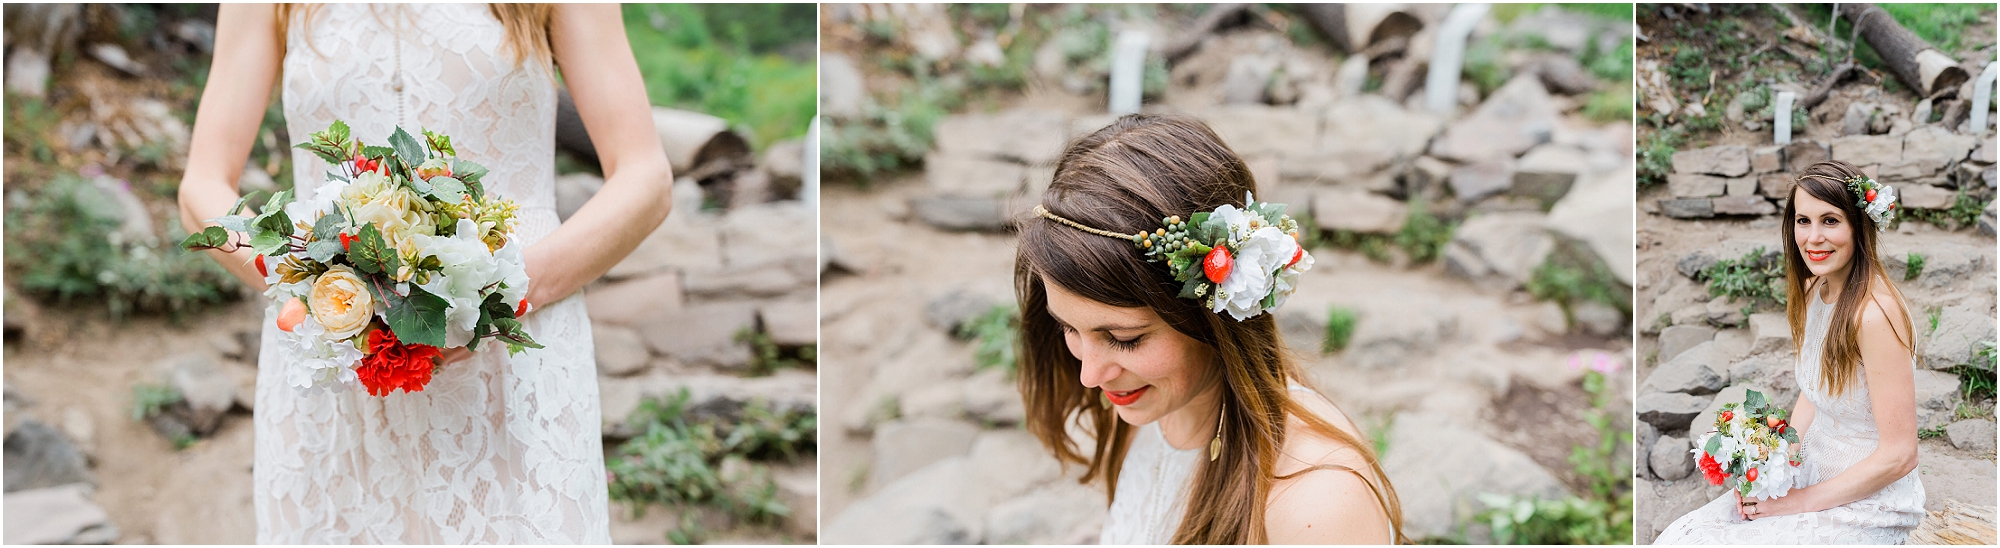 A handmade bouquet with strawberries, roses and greenery for this boho bride in Oregon. | Erica Swantek Photography